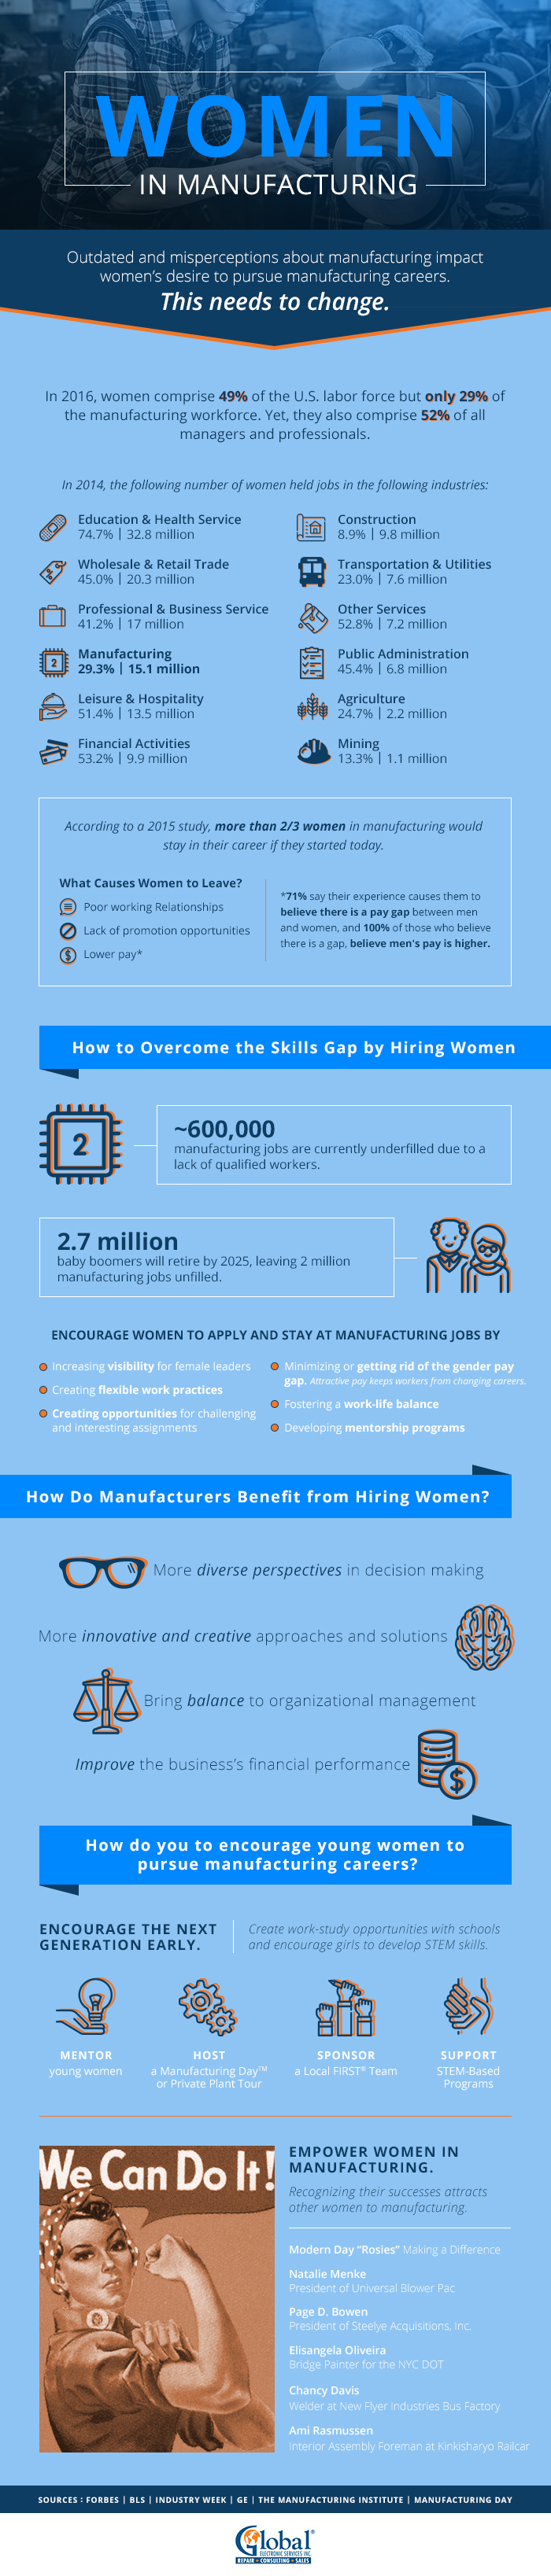 Women in Manufacturing Infographic